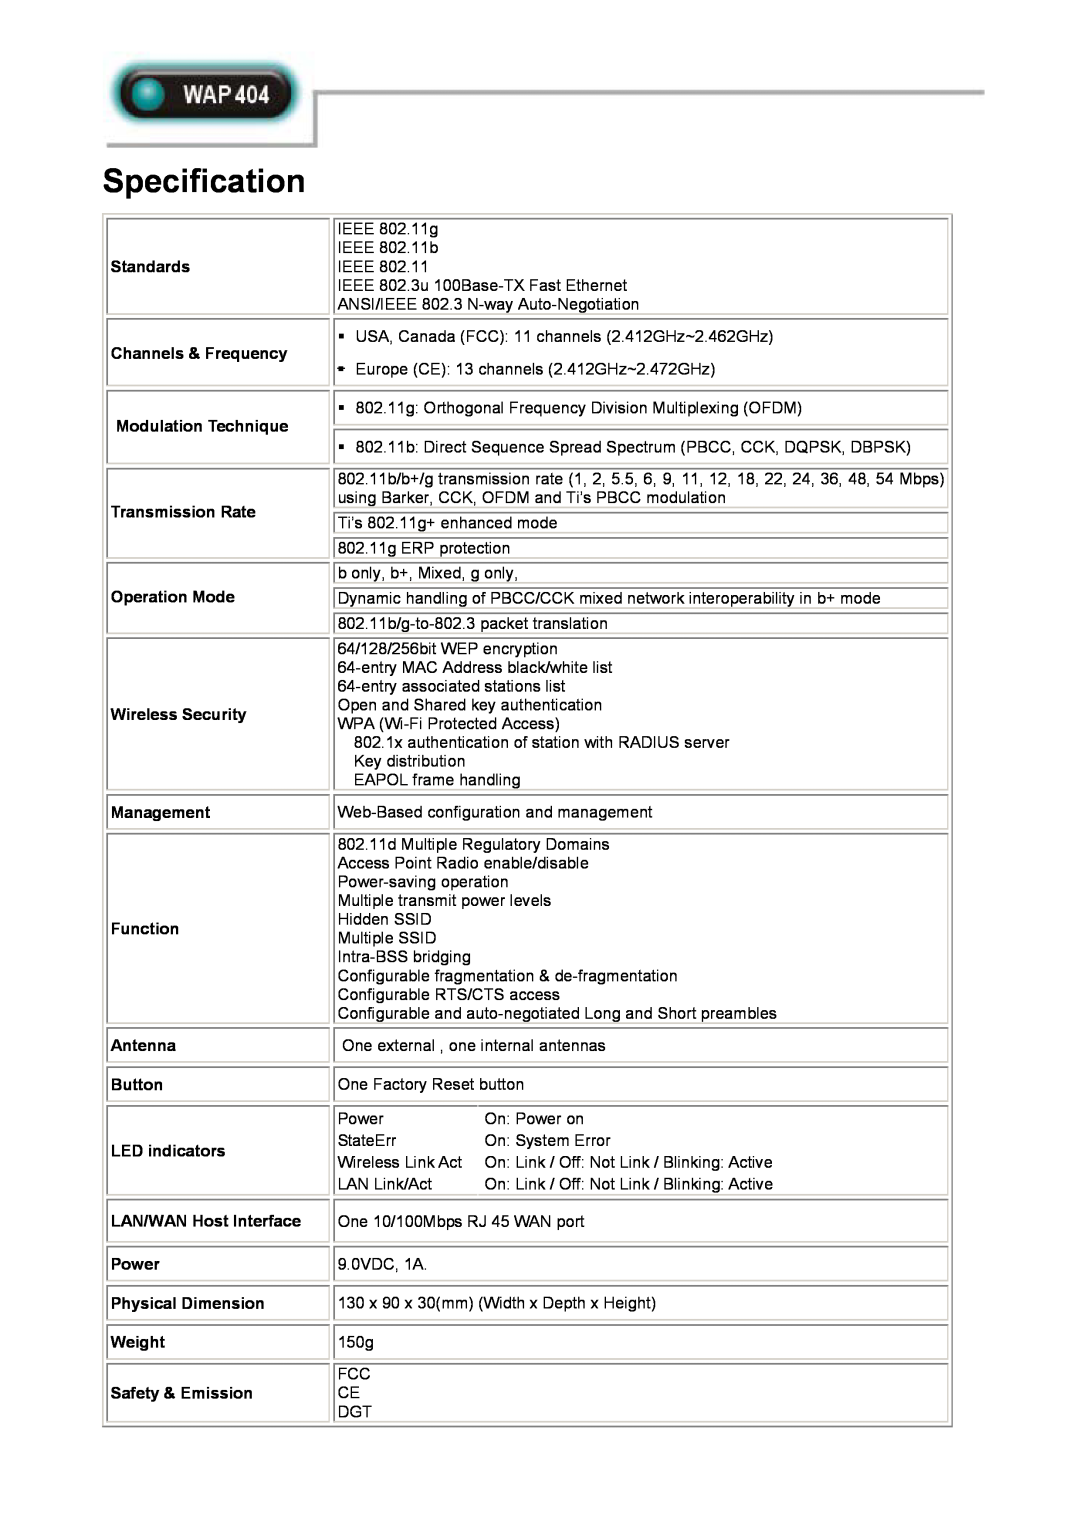 Abocom WAP404 Specification, Standards Channels & Frequency Modulation Technique Transmission Rate, Safety & Emission 